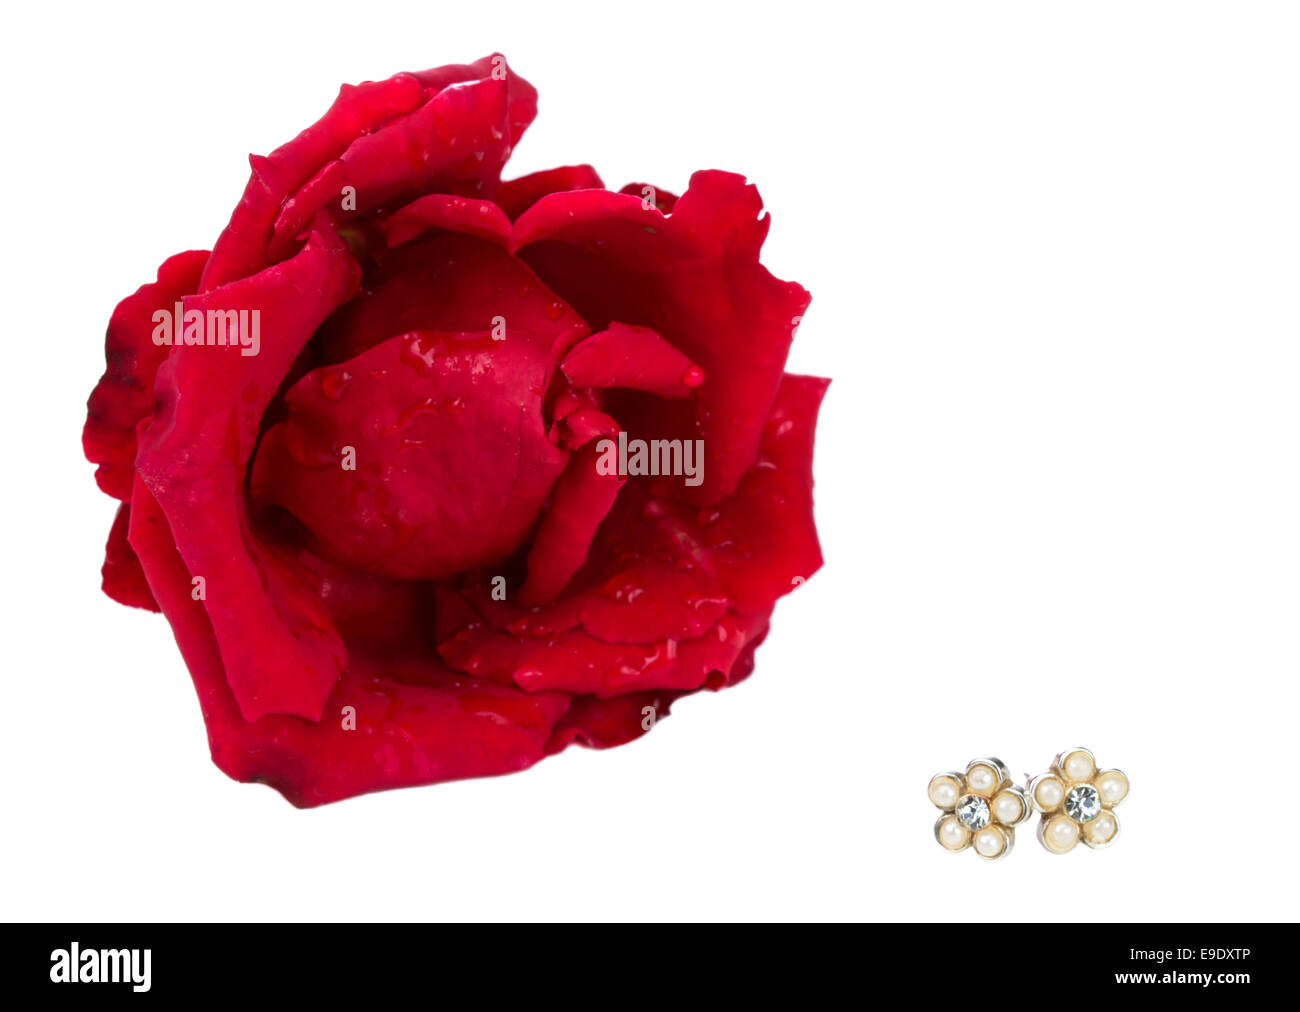 Vintage earrings and a red rose with water drops isolated on white background Stock Photo